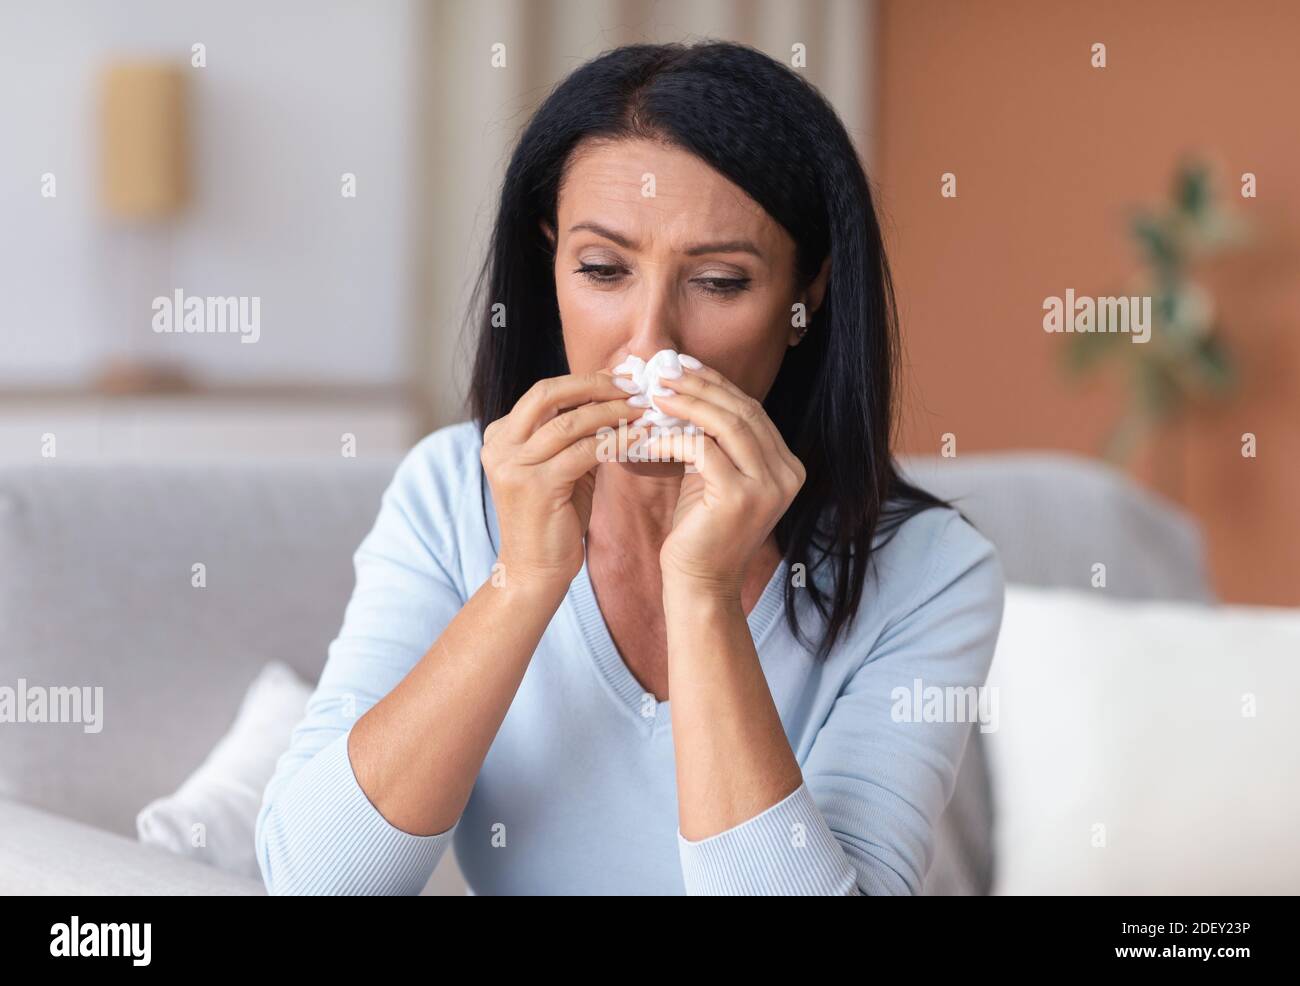 Sick mature woman sneezing and crying, holding tissue paper Stock Photo